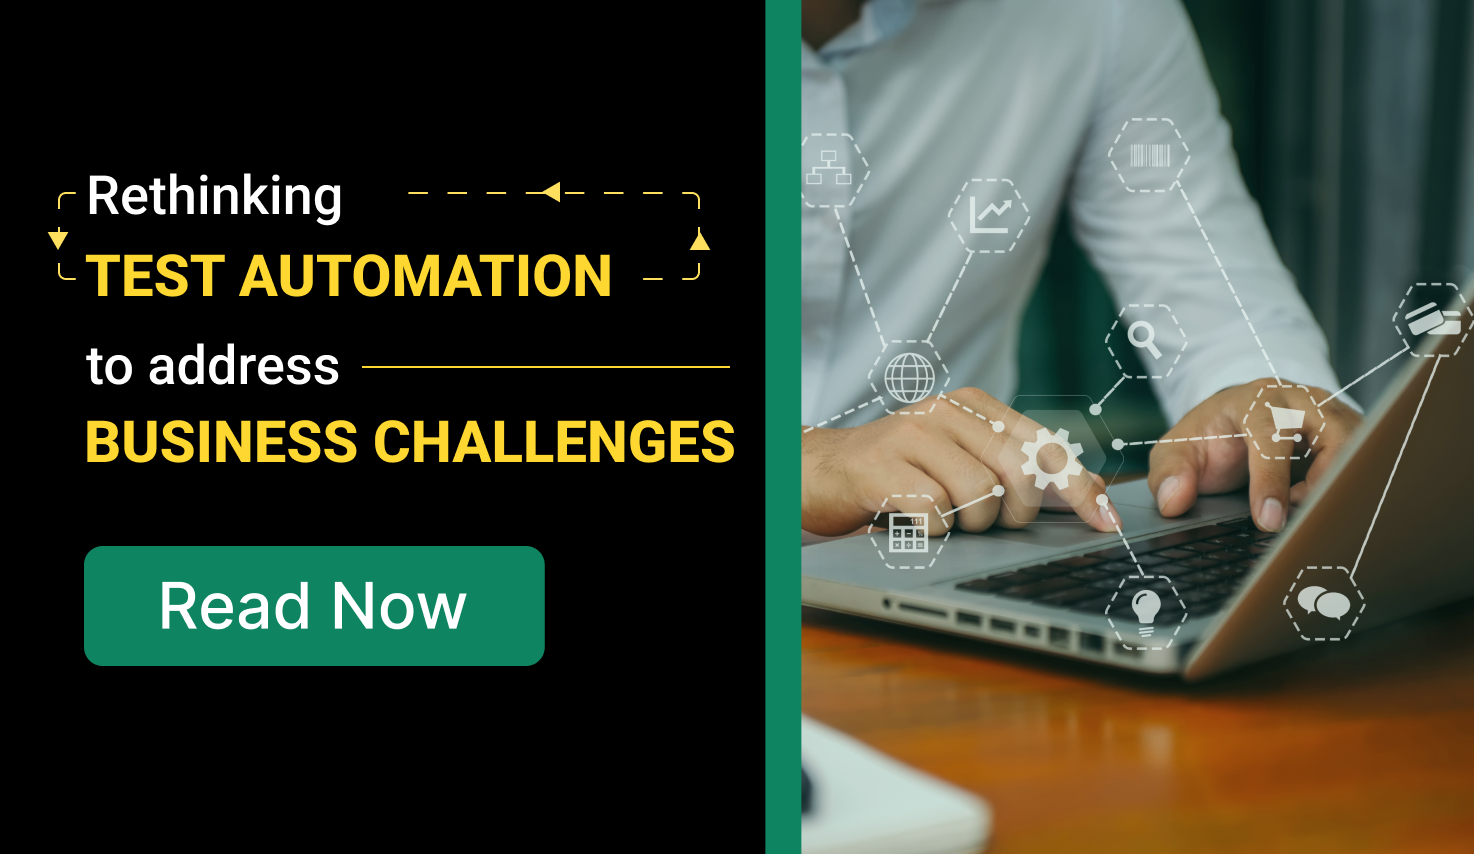 Rethinking Test Automation to Address Business Challenges